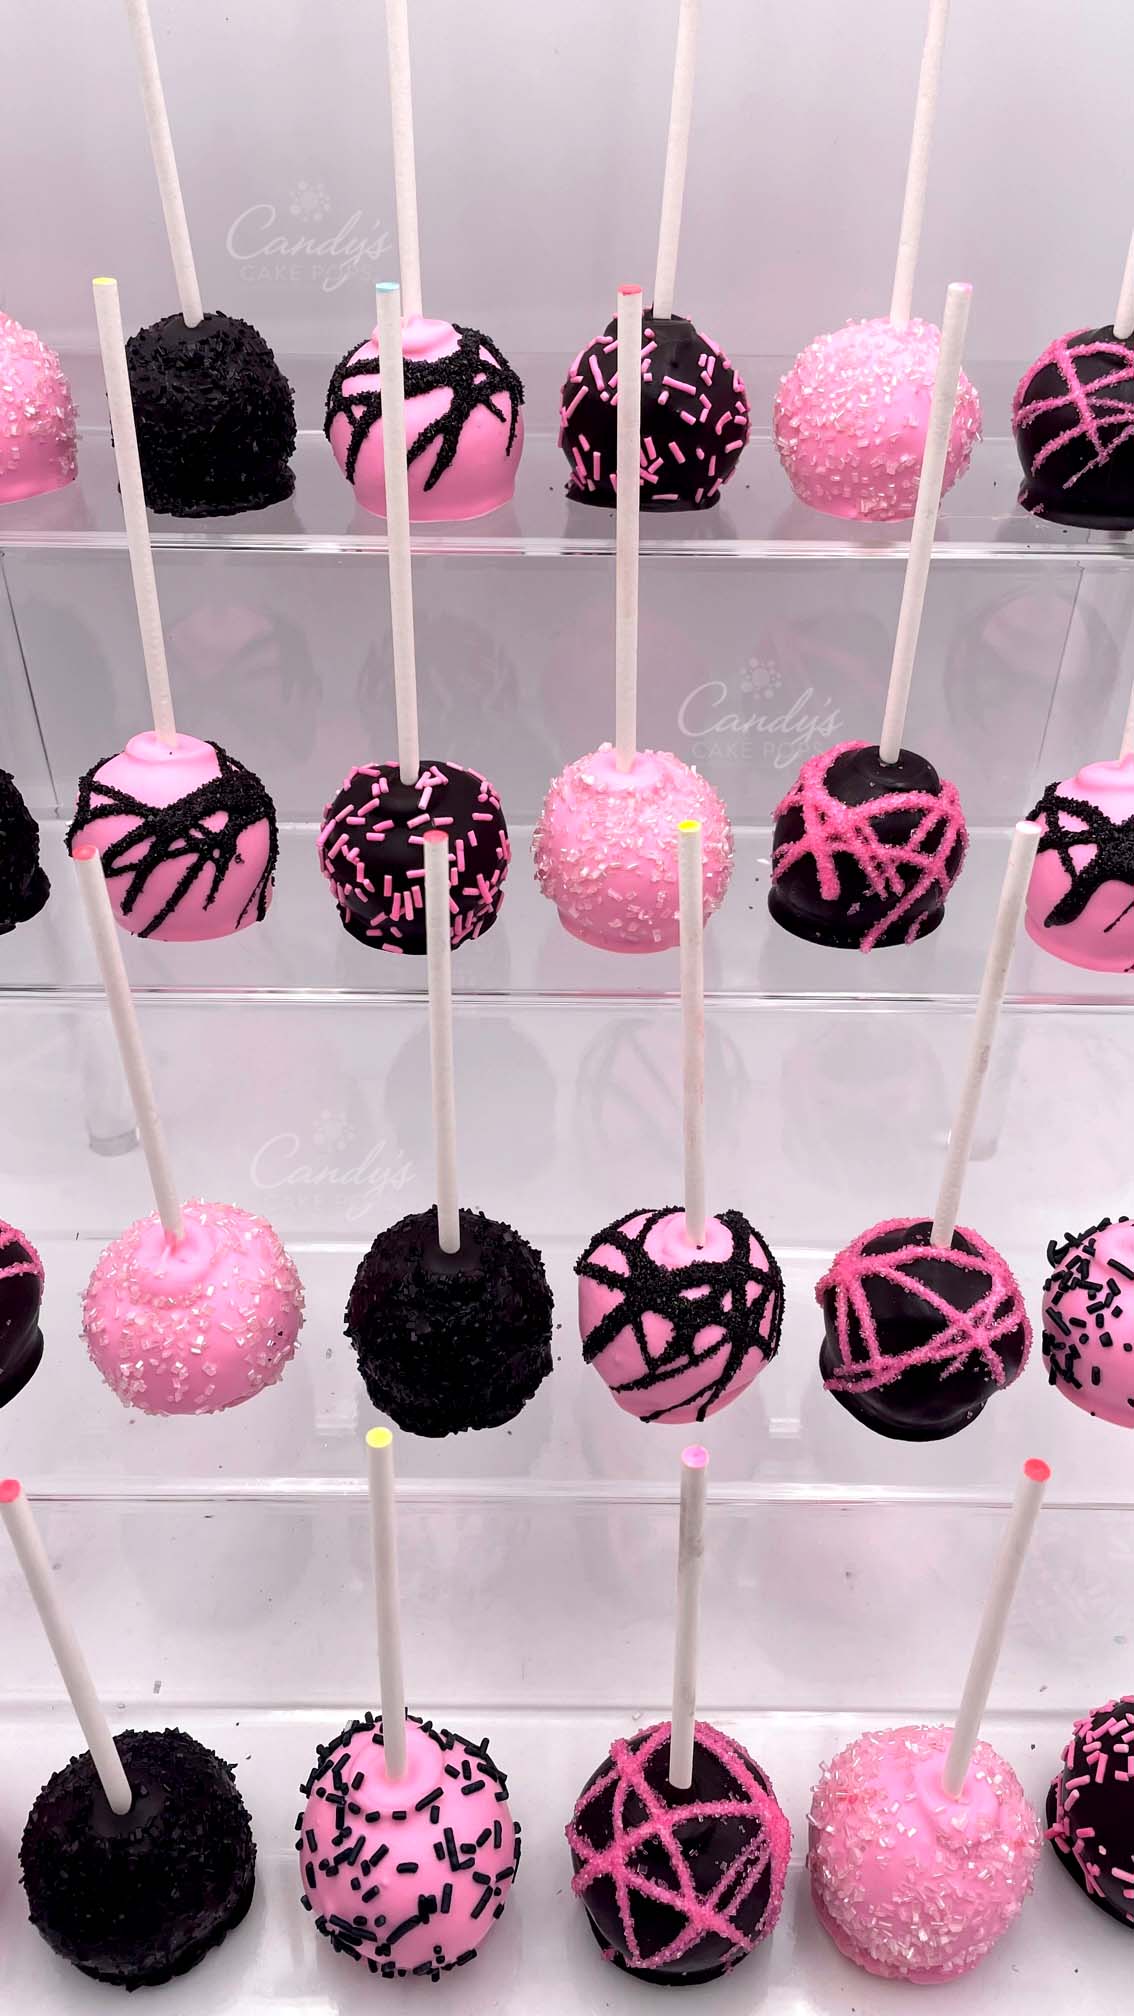 4 Tier  Acrylic Cake Pop Stand - For Self-Standing Cake Pops (Upsidedown) Holds up to 24 Cake Pops - Stand Only - Candy's Cake Pops